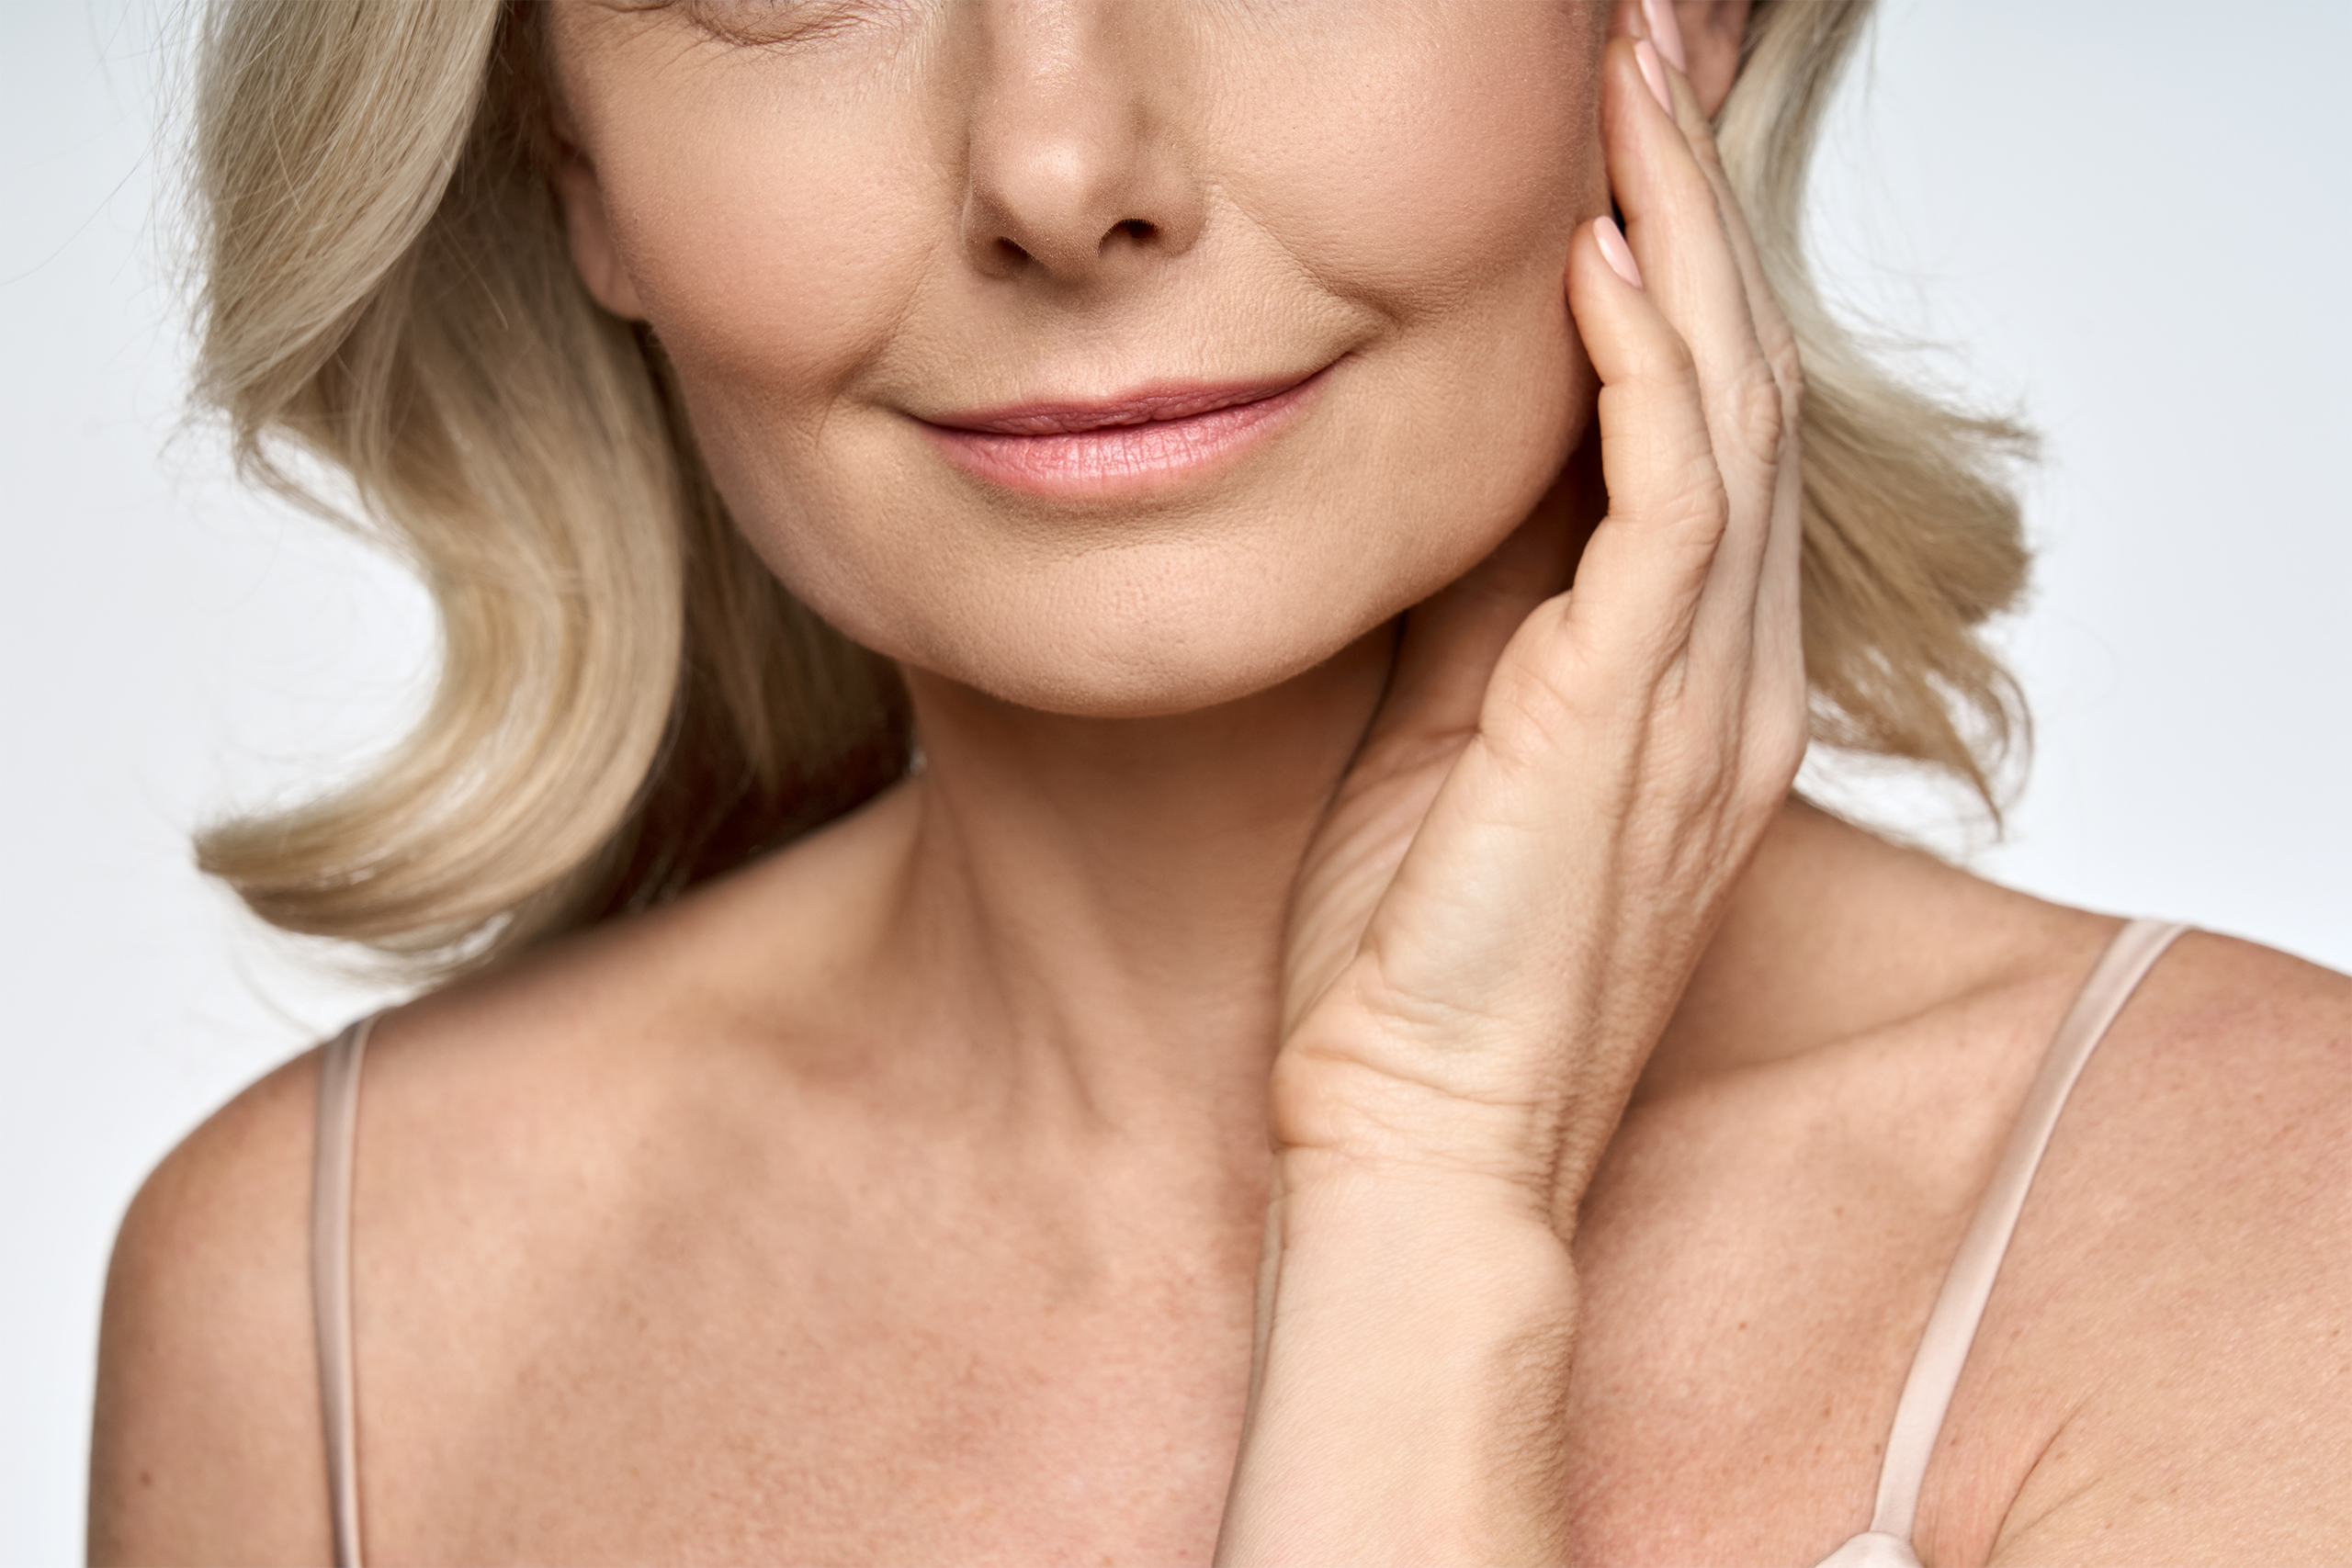 A beautiful adult woman's chin and neck is shown here to represent the concept of a neck lift vs. neck liposuction.